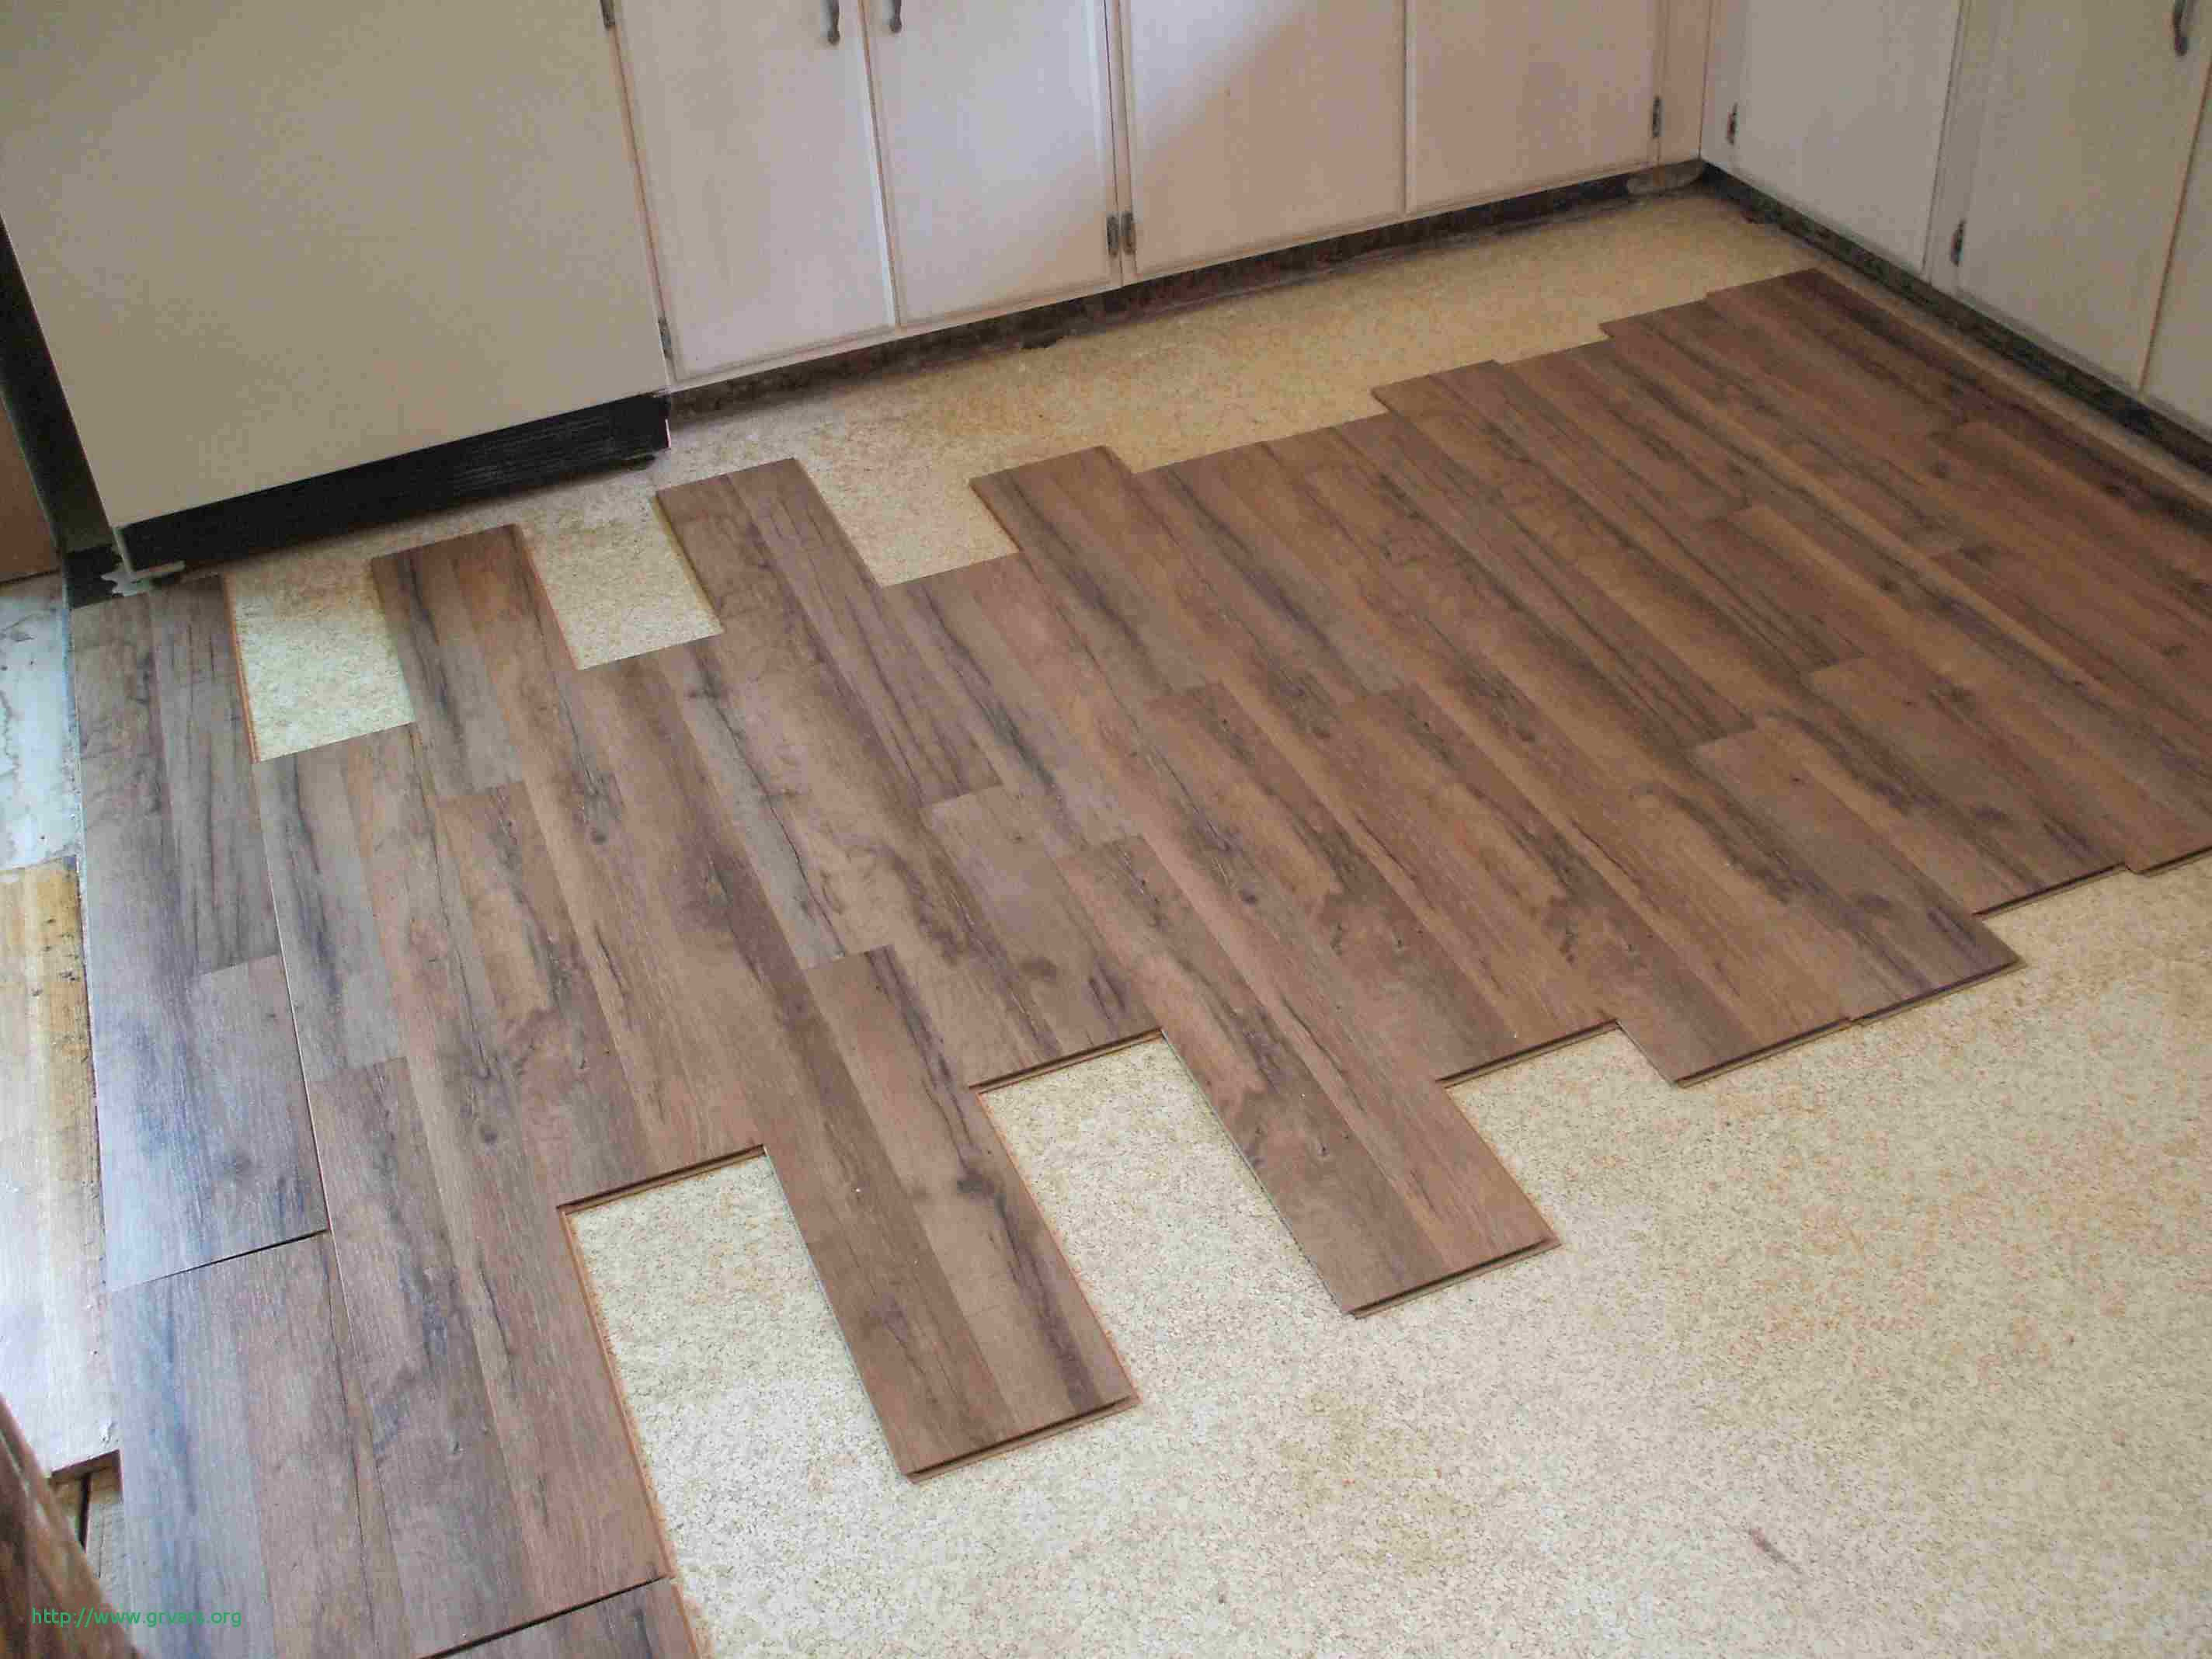 22 Recommended Hardwood Floor Cost for 1500 Sq Ft 2024 free download hardwood floor cost for 1500 sq ft of 24 impressionnant can you install hardwood floors on concrete slab in can you install hardwood floors on concrete slab ac289lagant how to lay laminate f